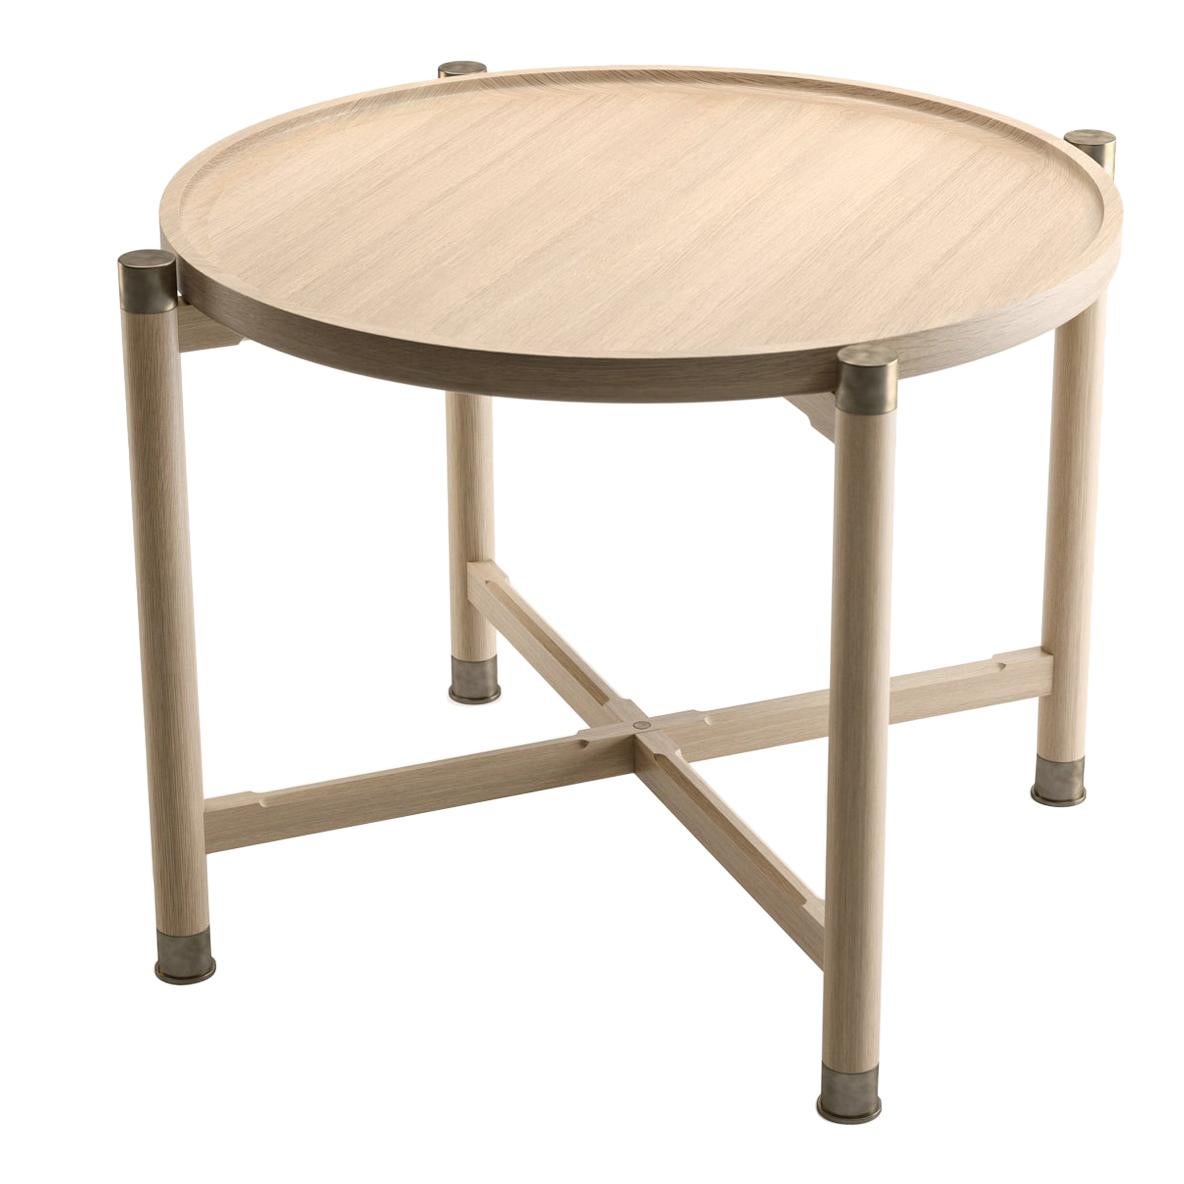 Otto Round Side Table in Bleached Oak with Antique Brass Fittings For Sale